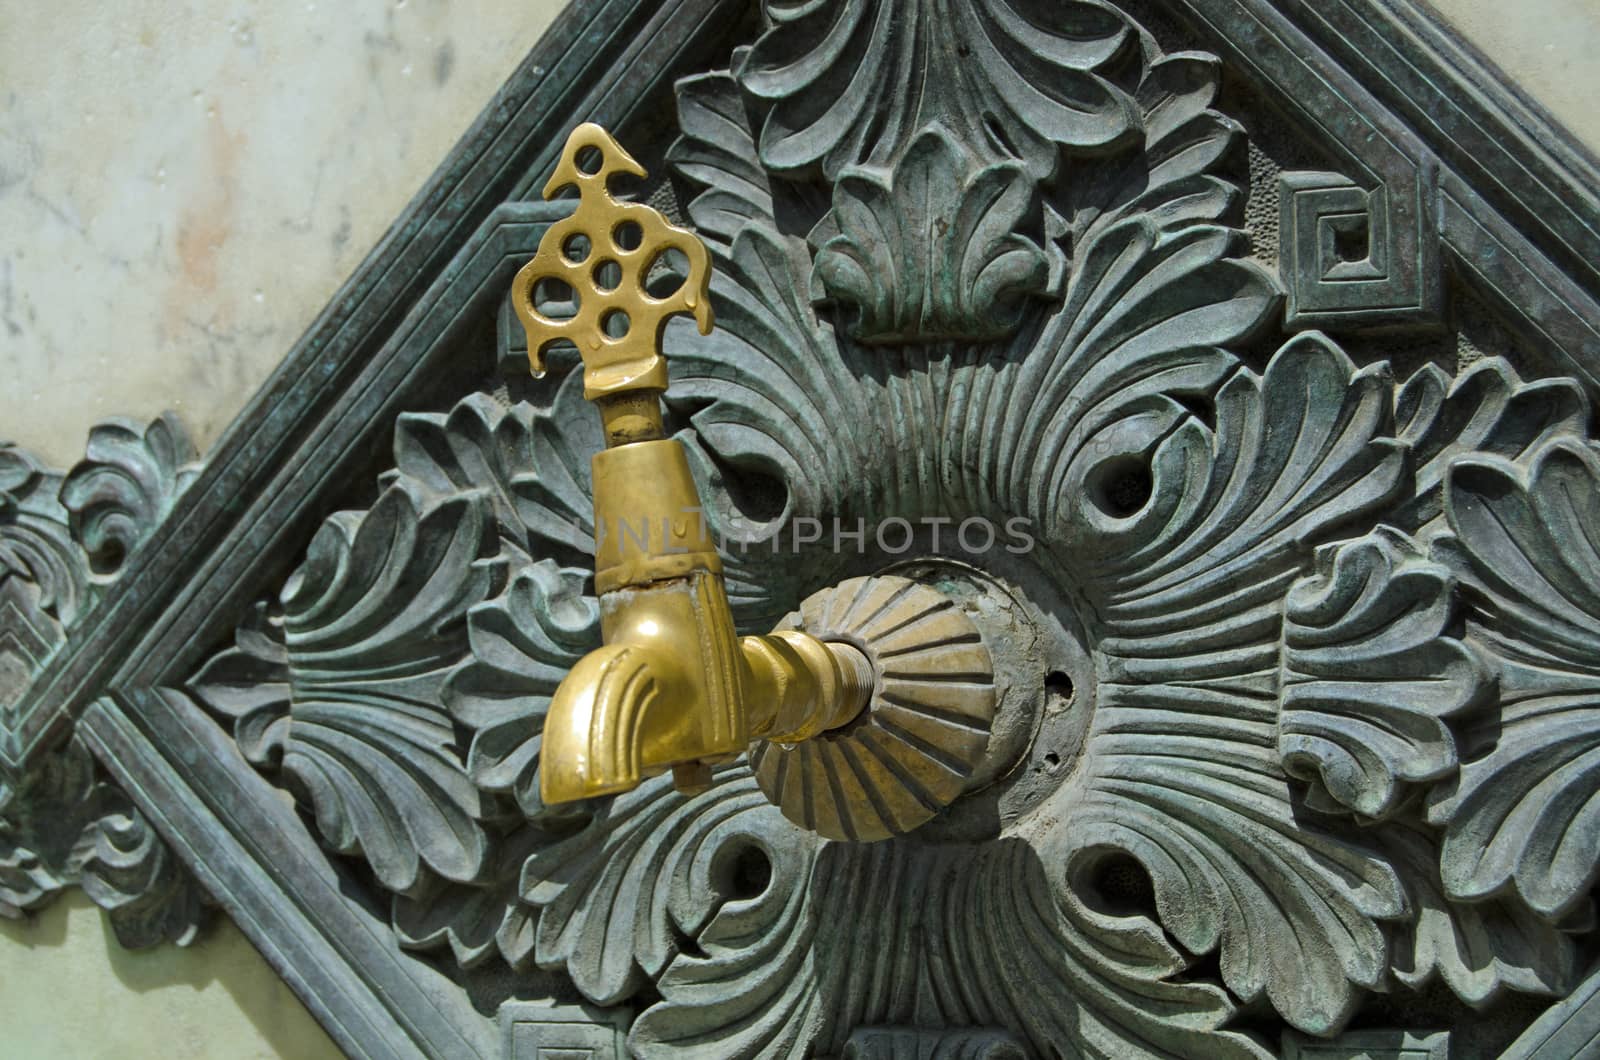 Detail of one of the taps providing water at the landmark German Fountain in the Sultanhamet district of Istanbul.  The monument was erected to mark German - Ottoman relations in 1898 and has been in public use since.